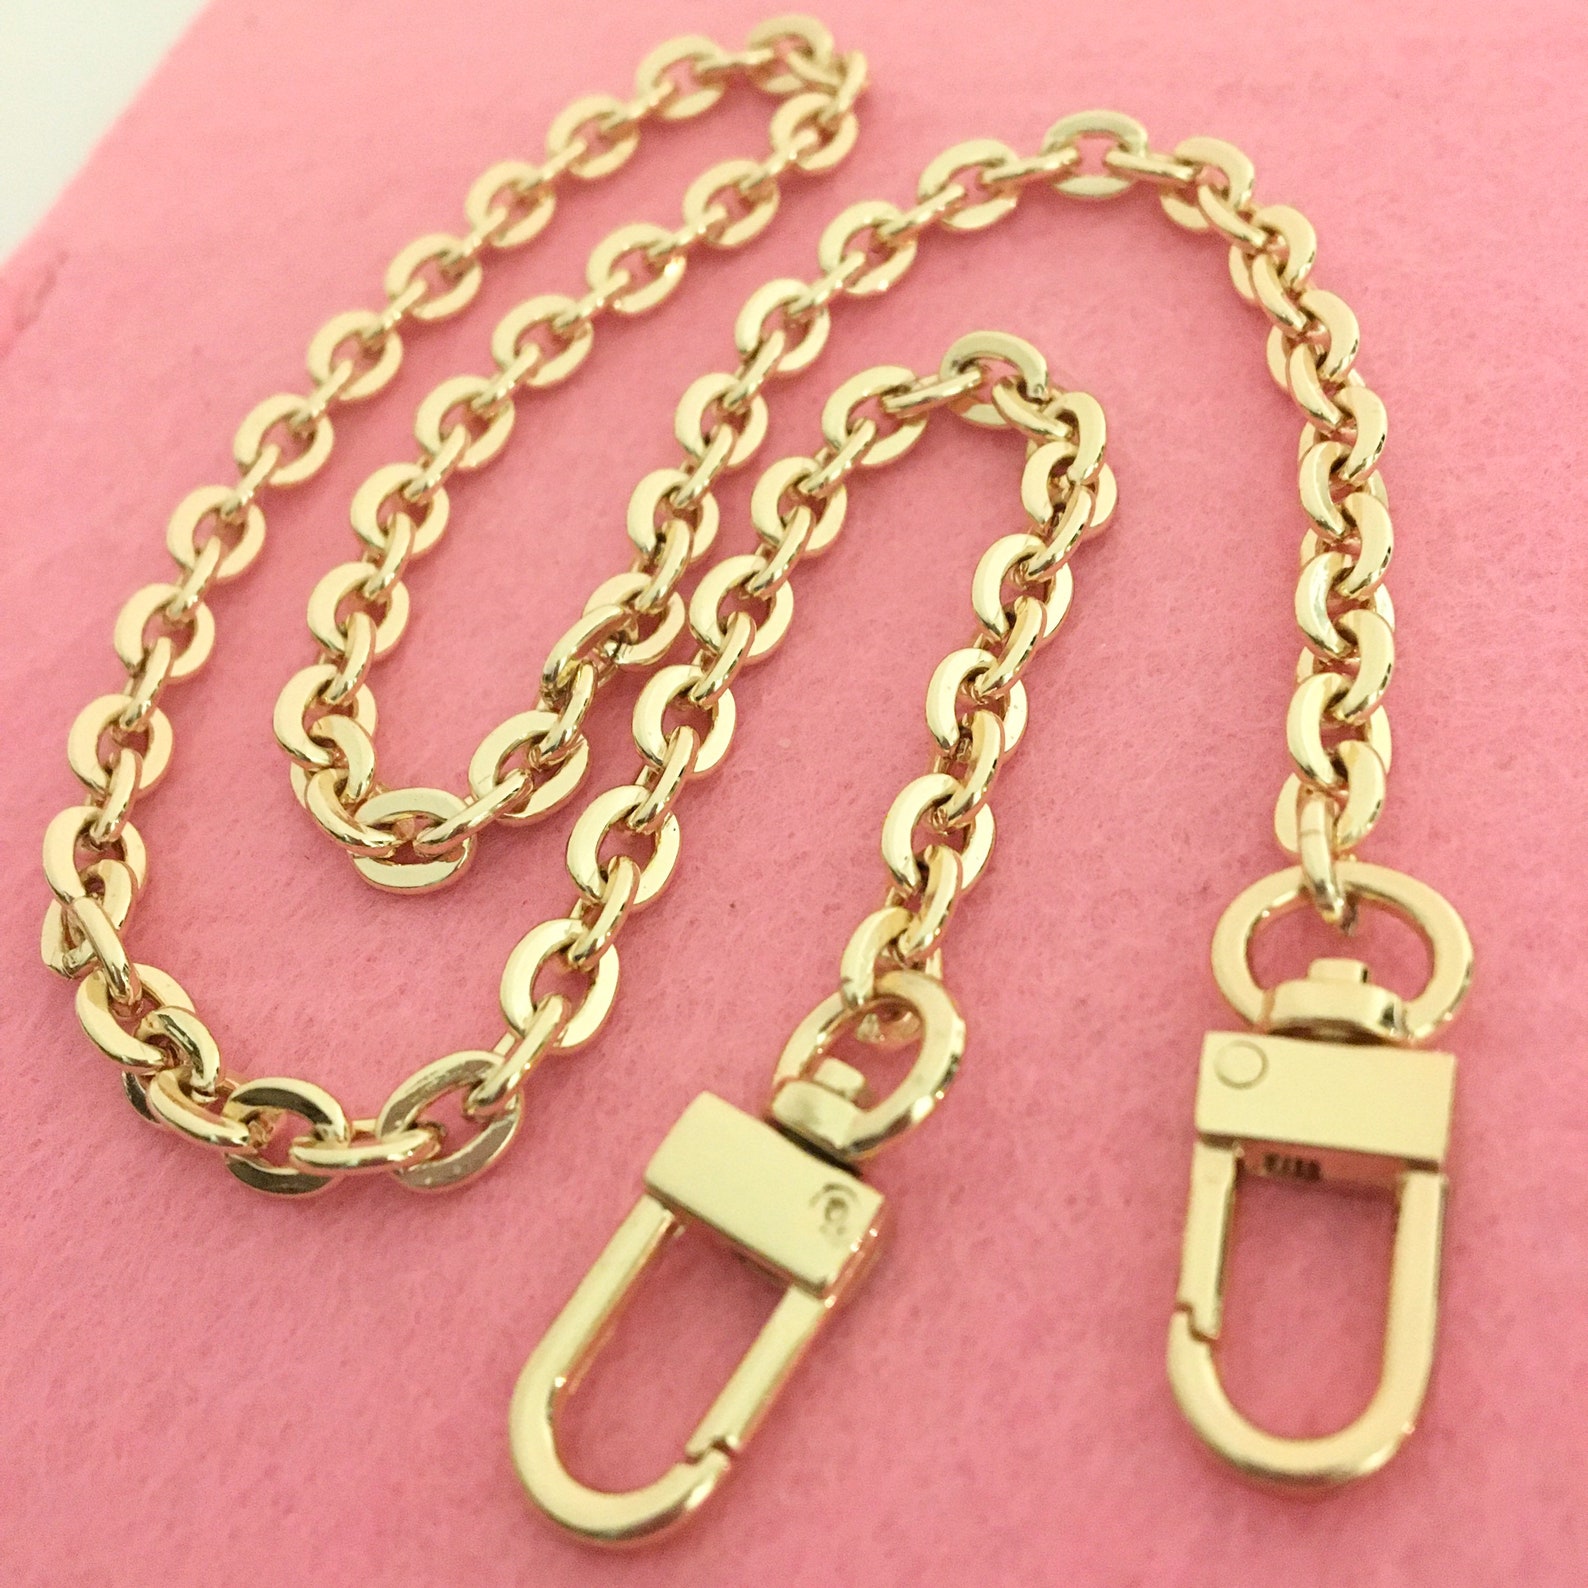 Purse Chain Gold Oval 7mm Crossbody Shoulder Strap for - Etsy